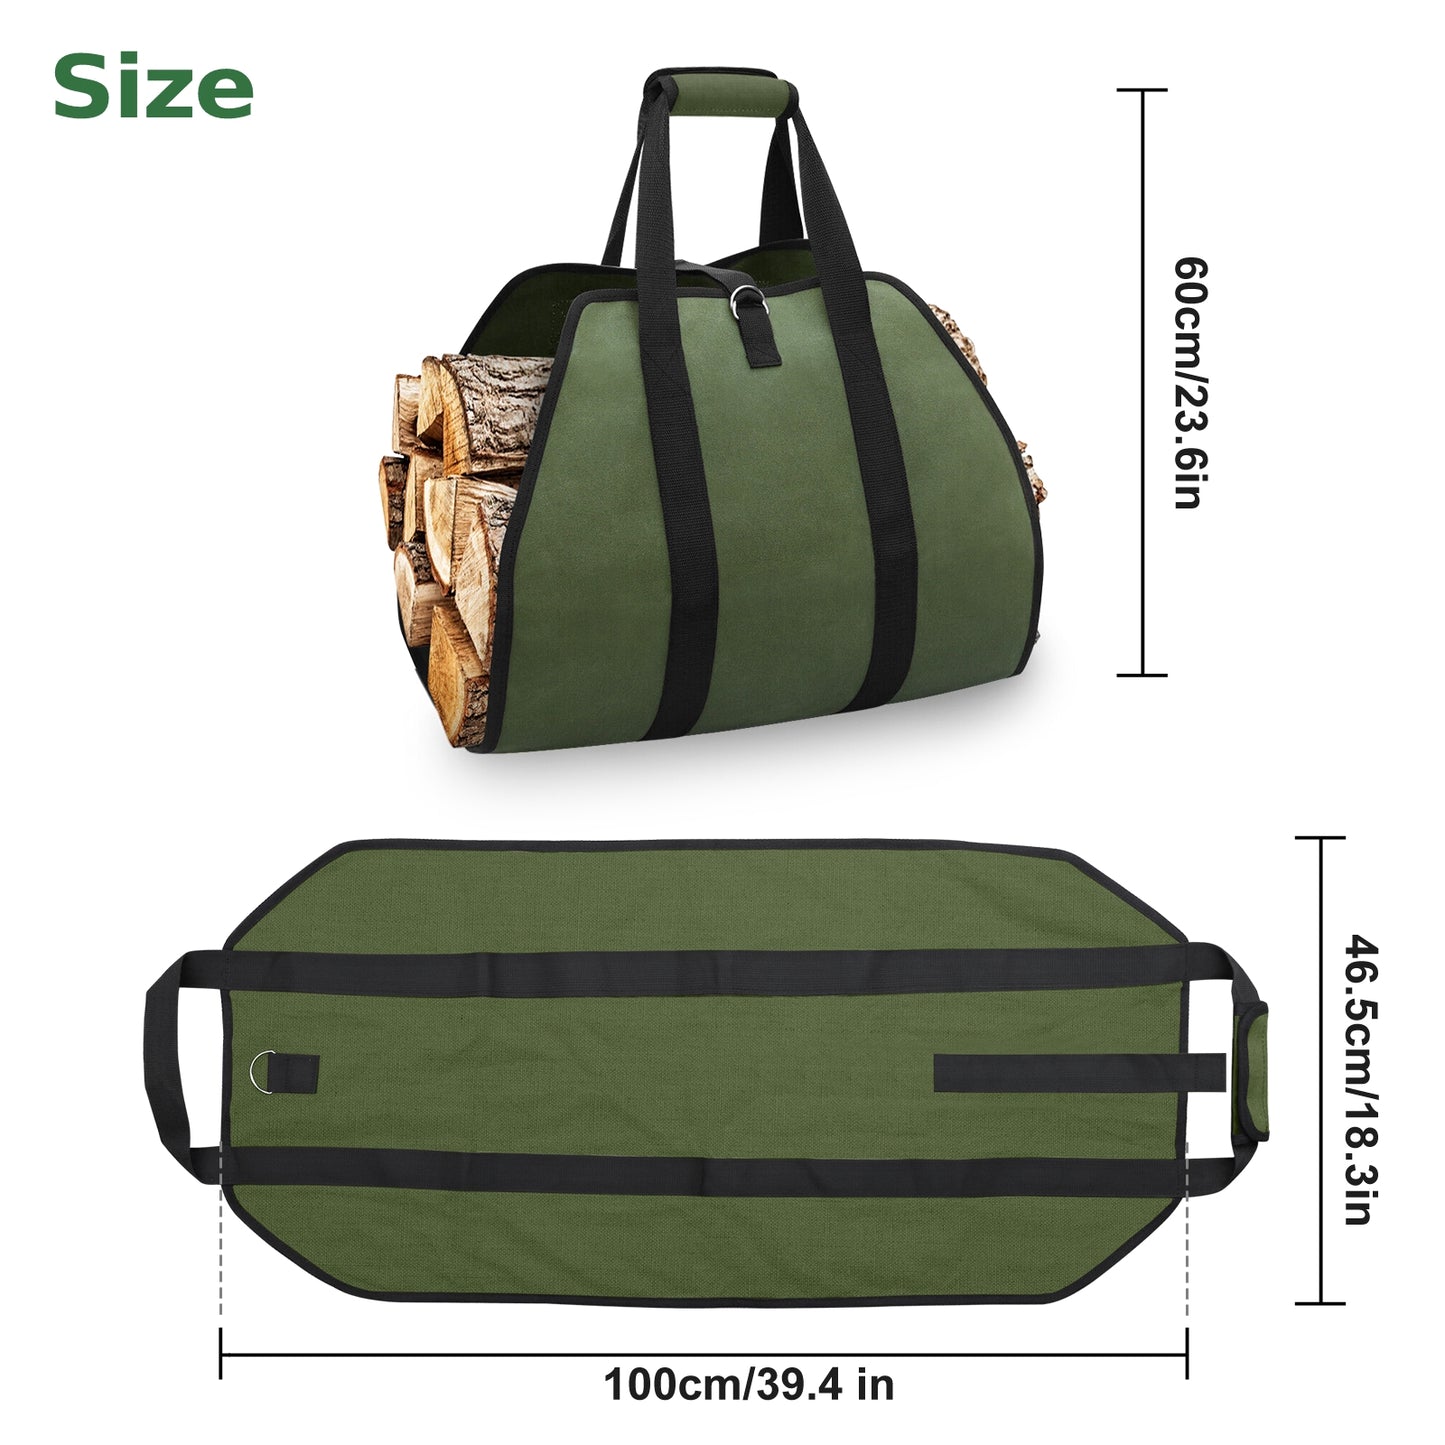 Canvas Firewood Log Carrier - Durable Tote for Stove and Fireplace Accessories (Green)